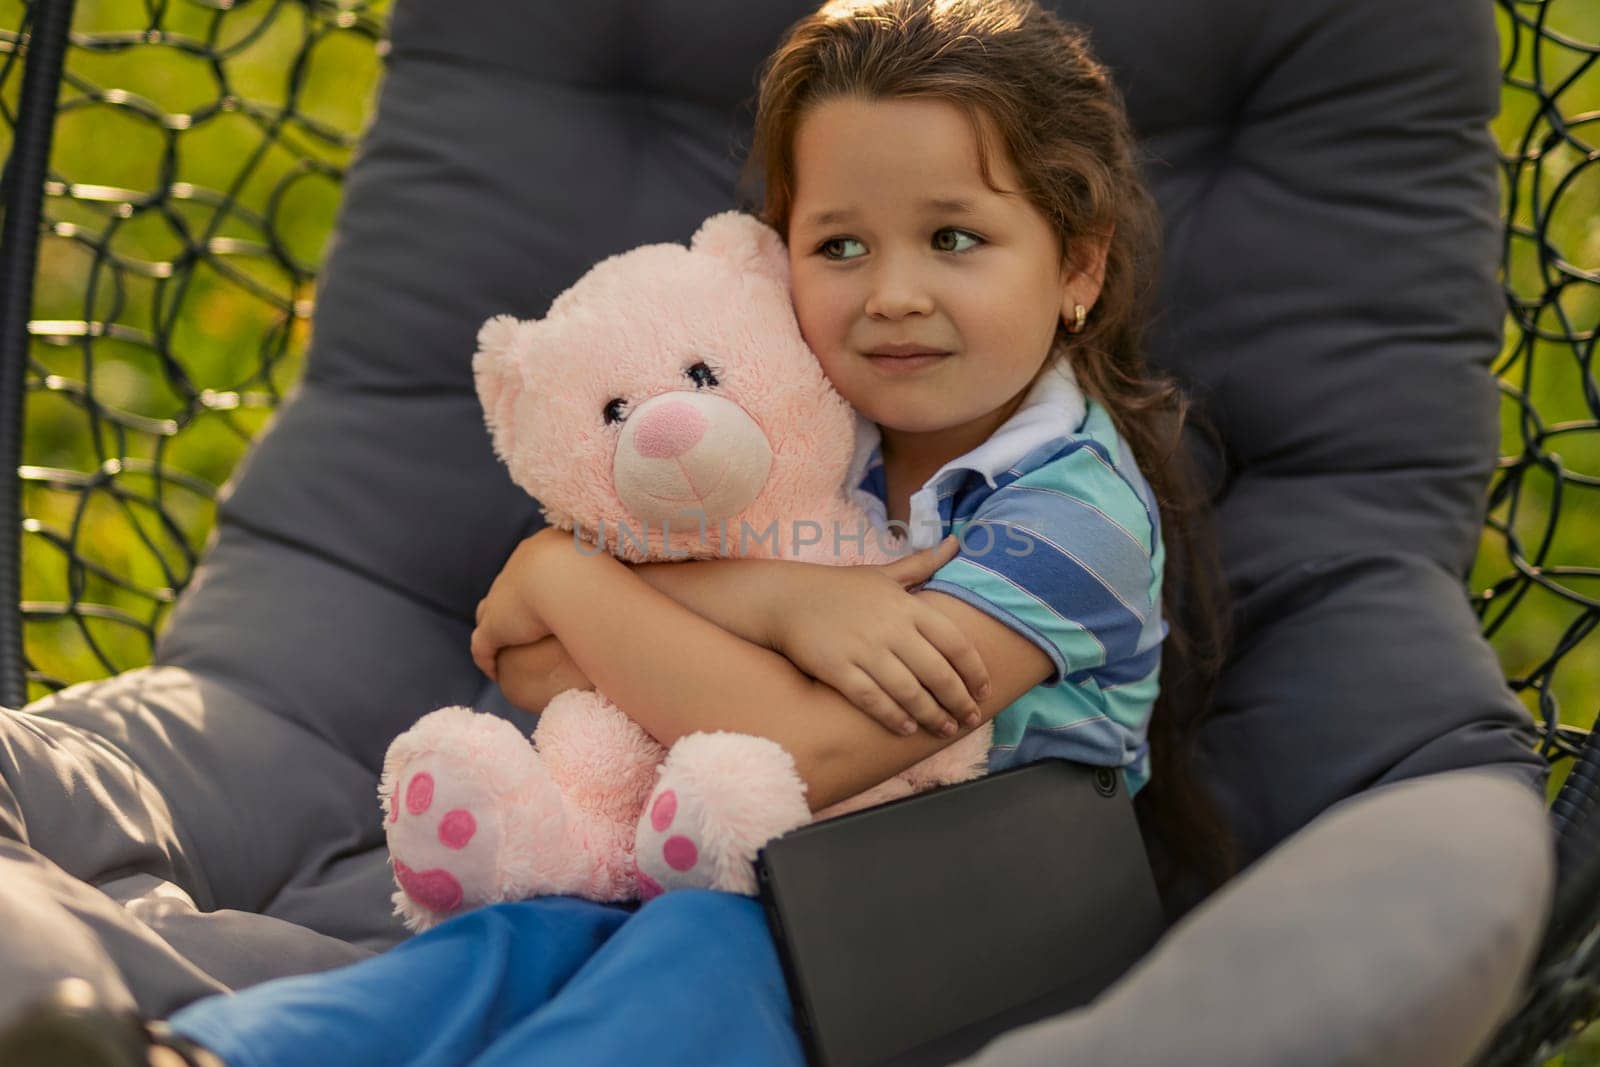 child hugging a teddy bear while sitting in a hanging chair